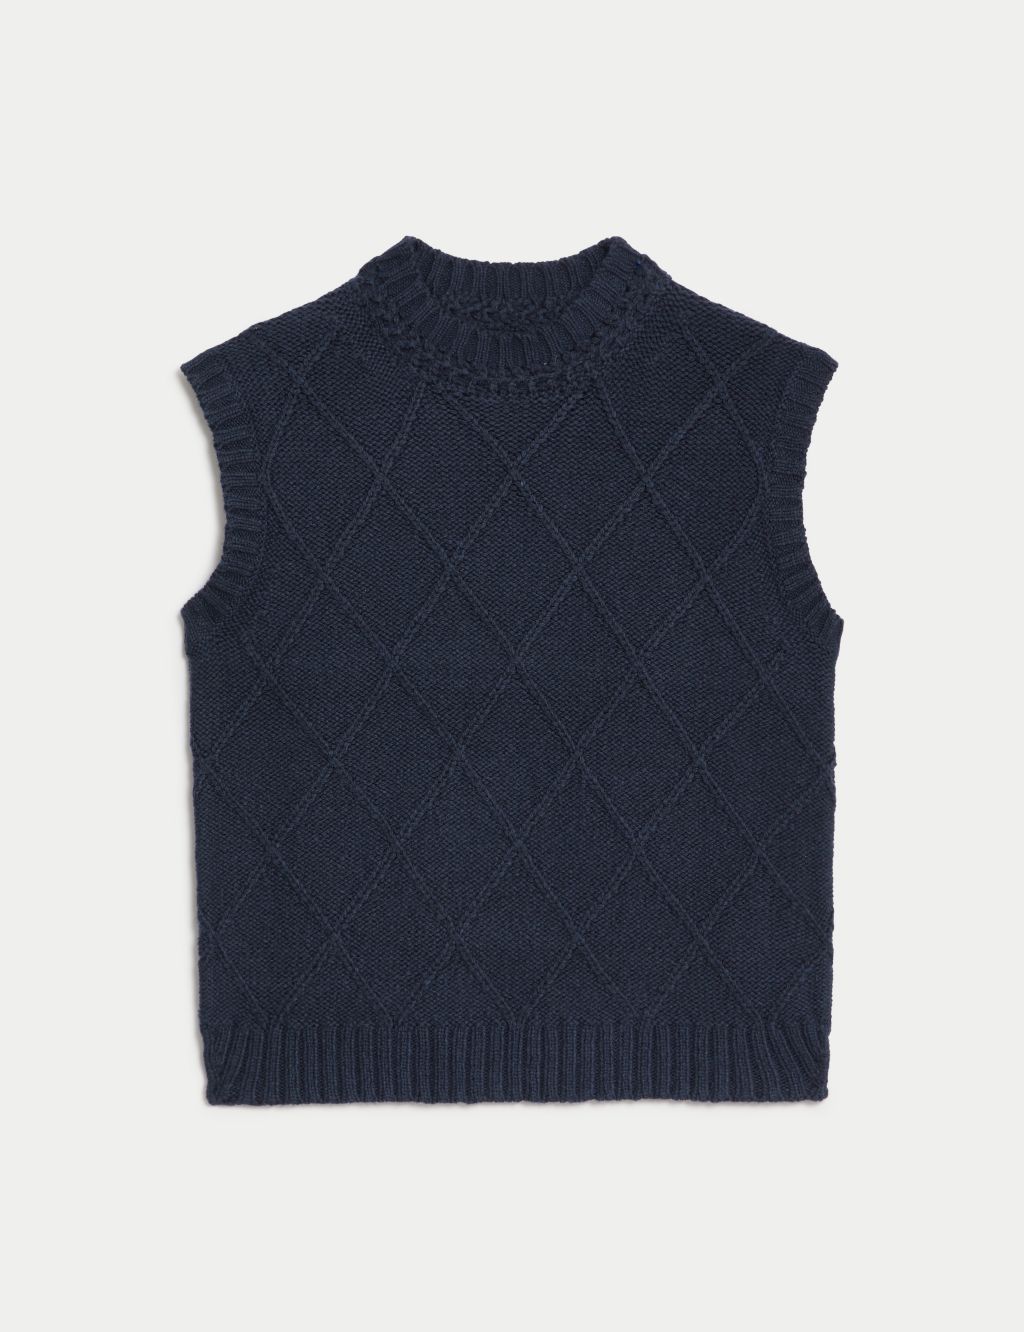 Diamond Stitch Knitted Vest with Wool image 2